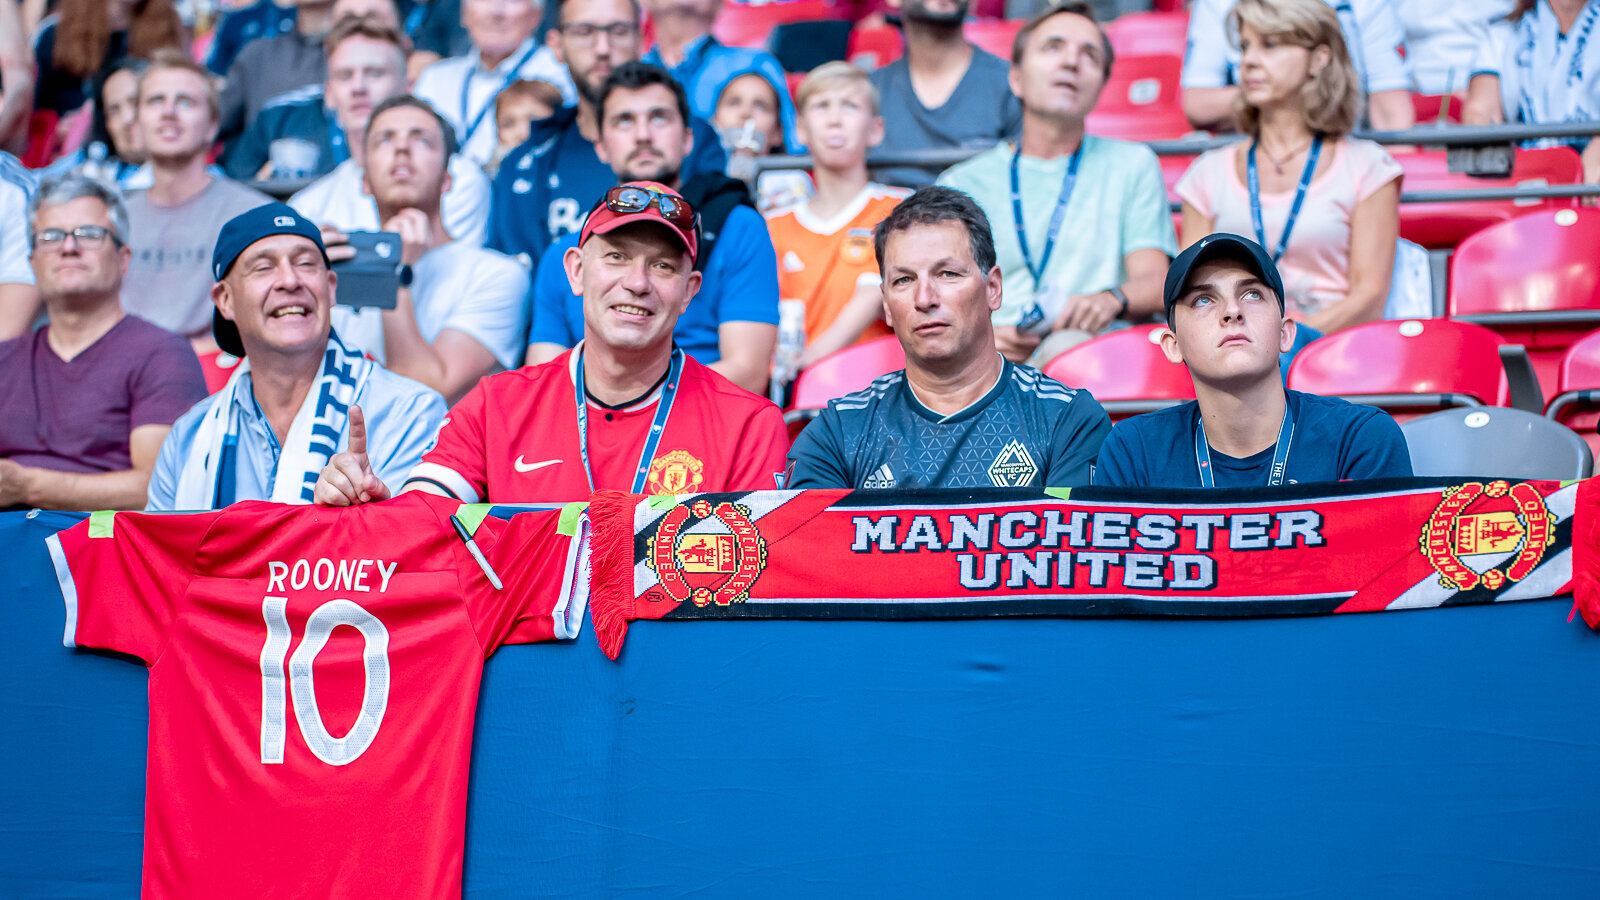 2019-08-17 Manchester United FC Supporters.jpg